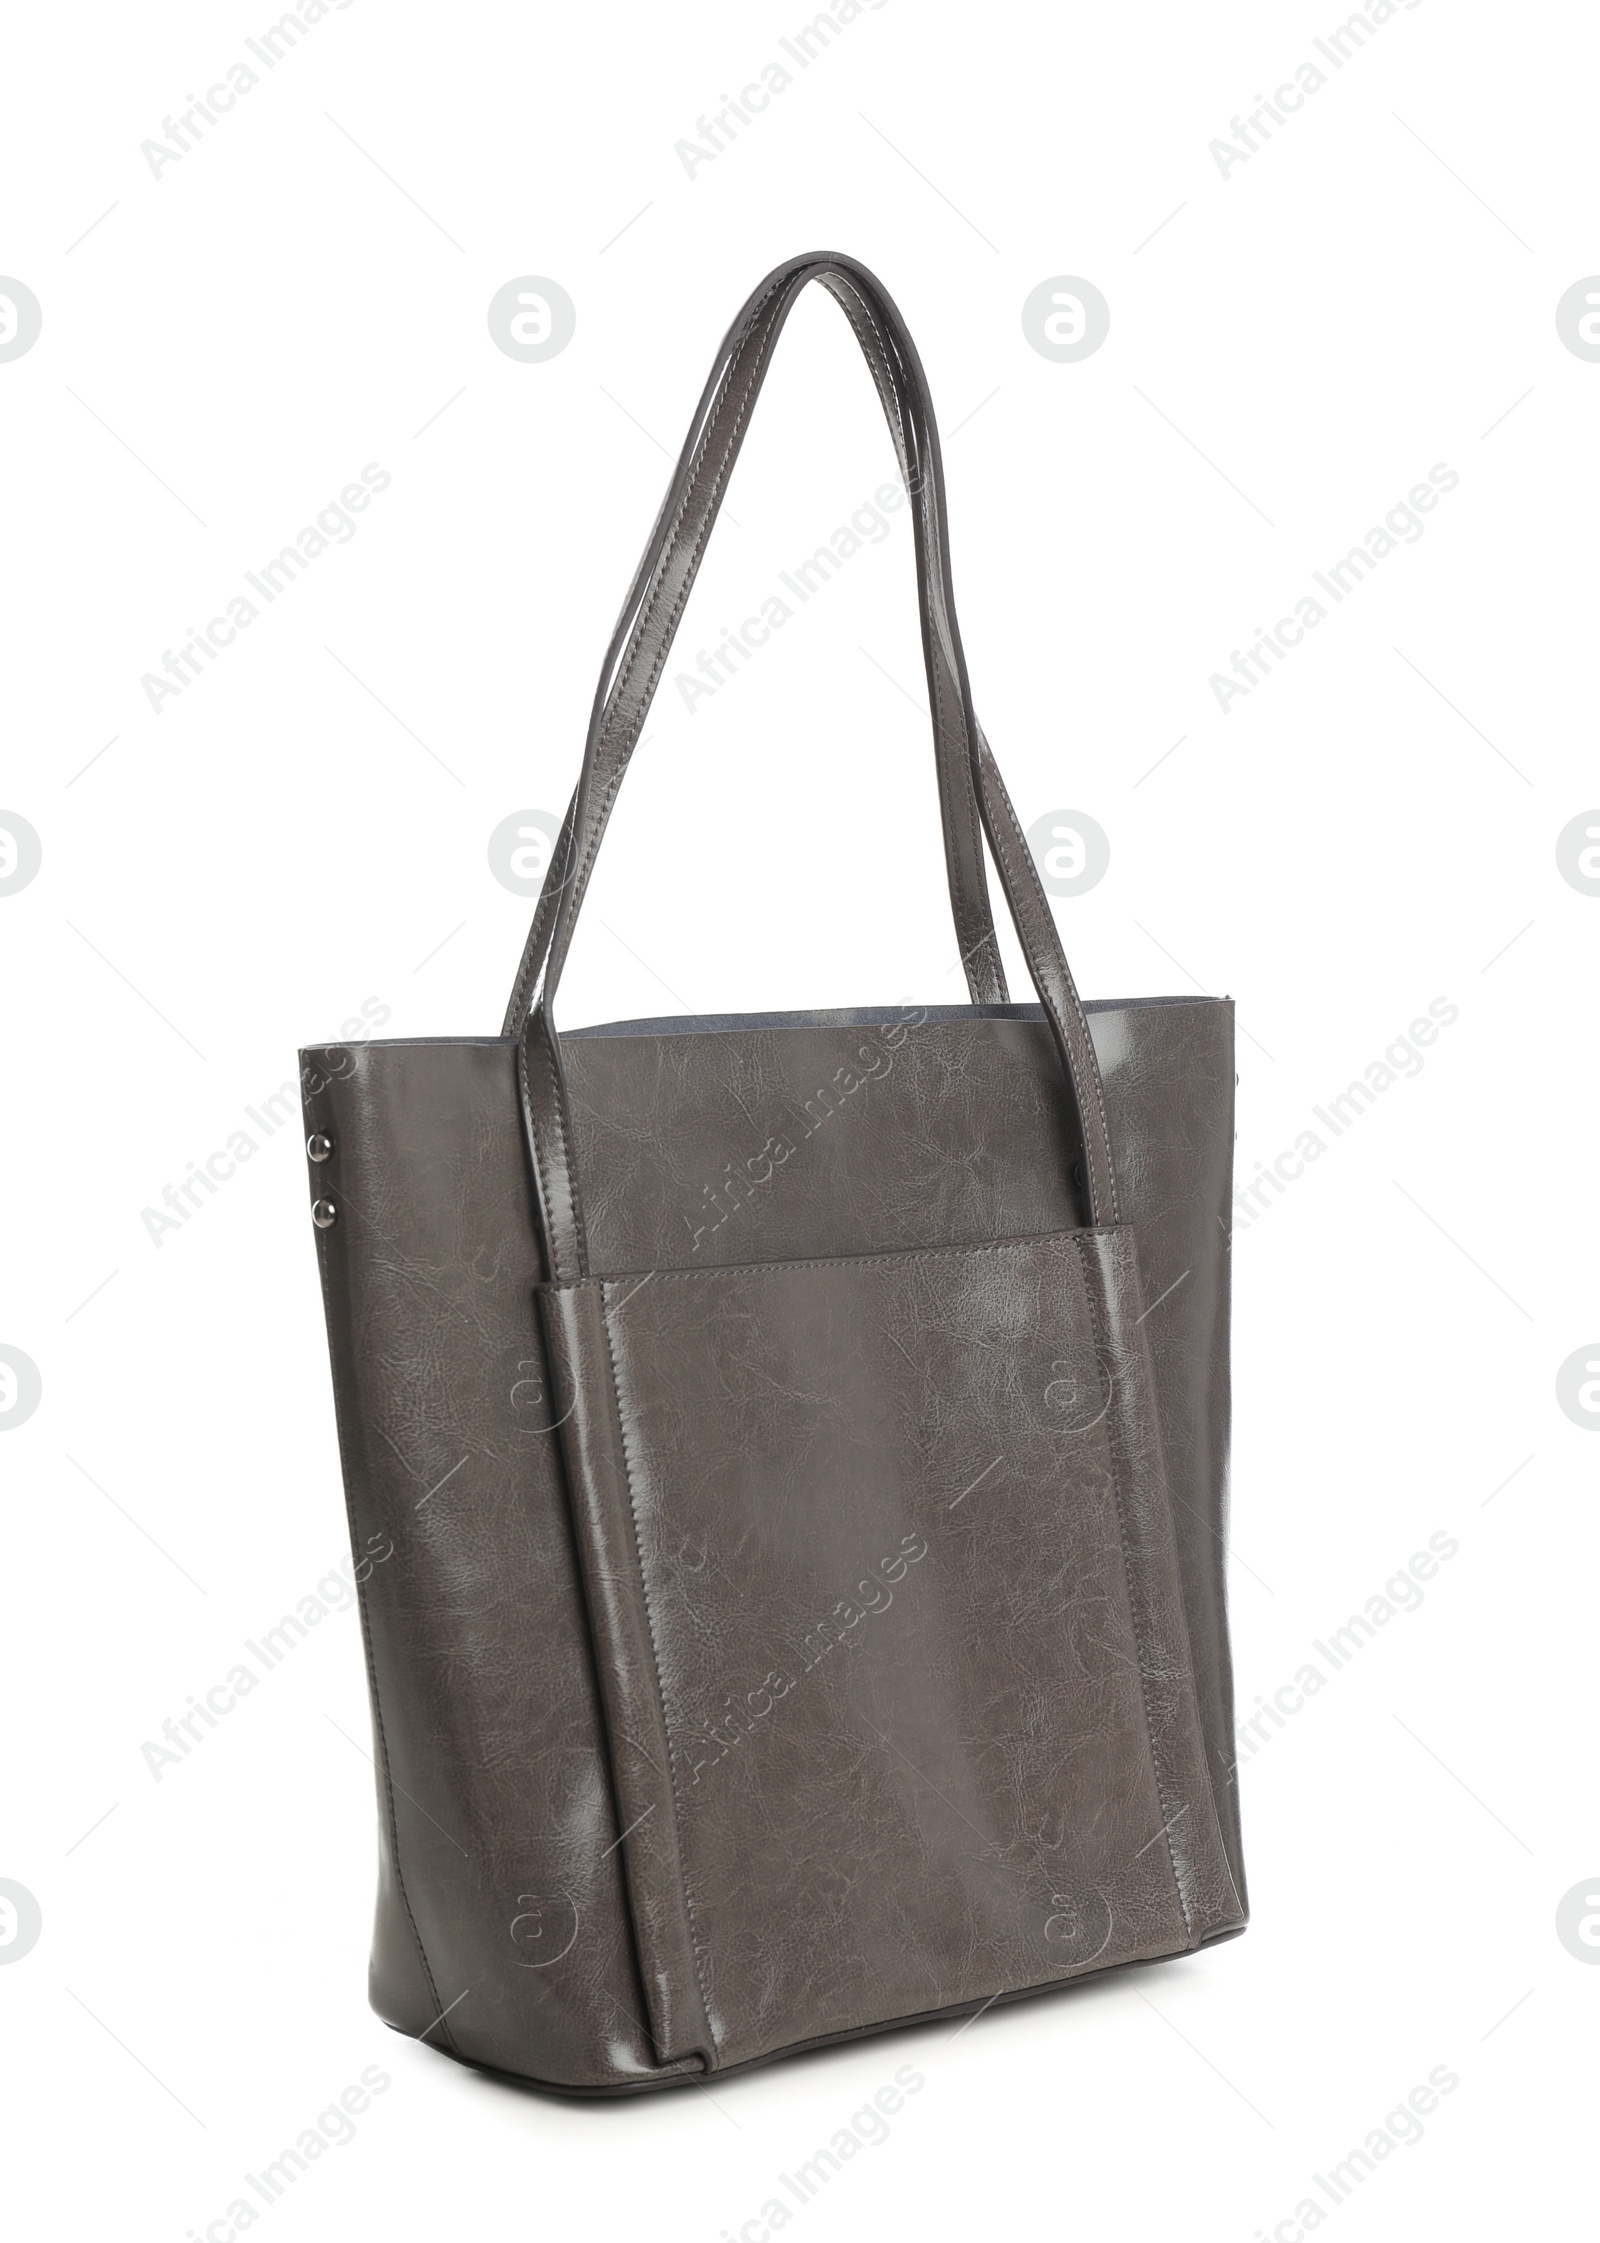 Photo of New leather shopper bag on white background